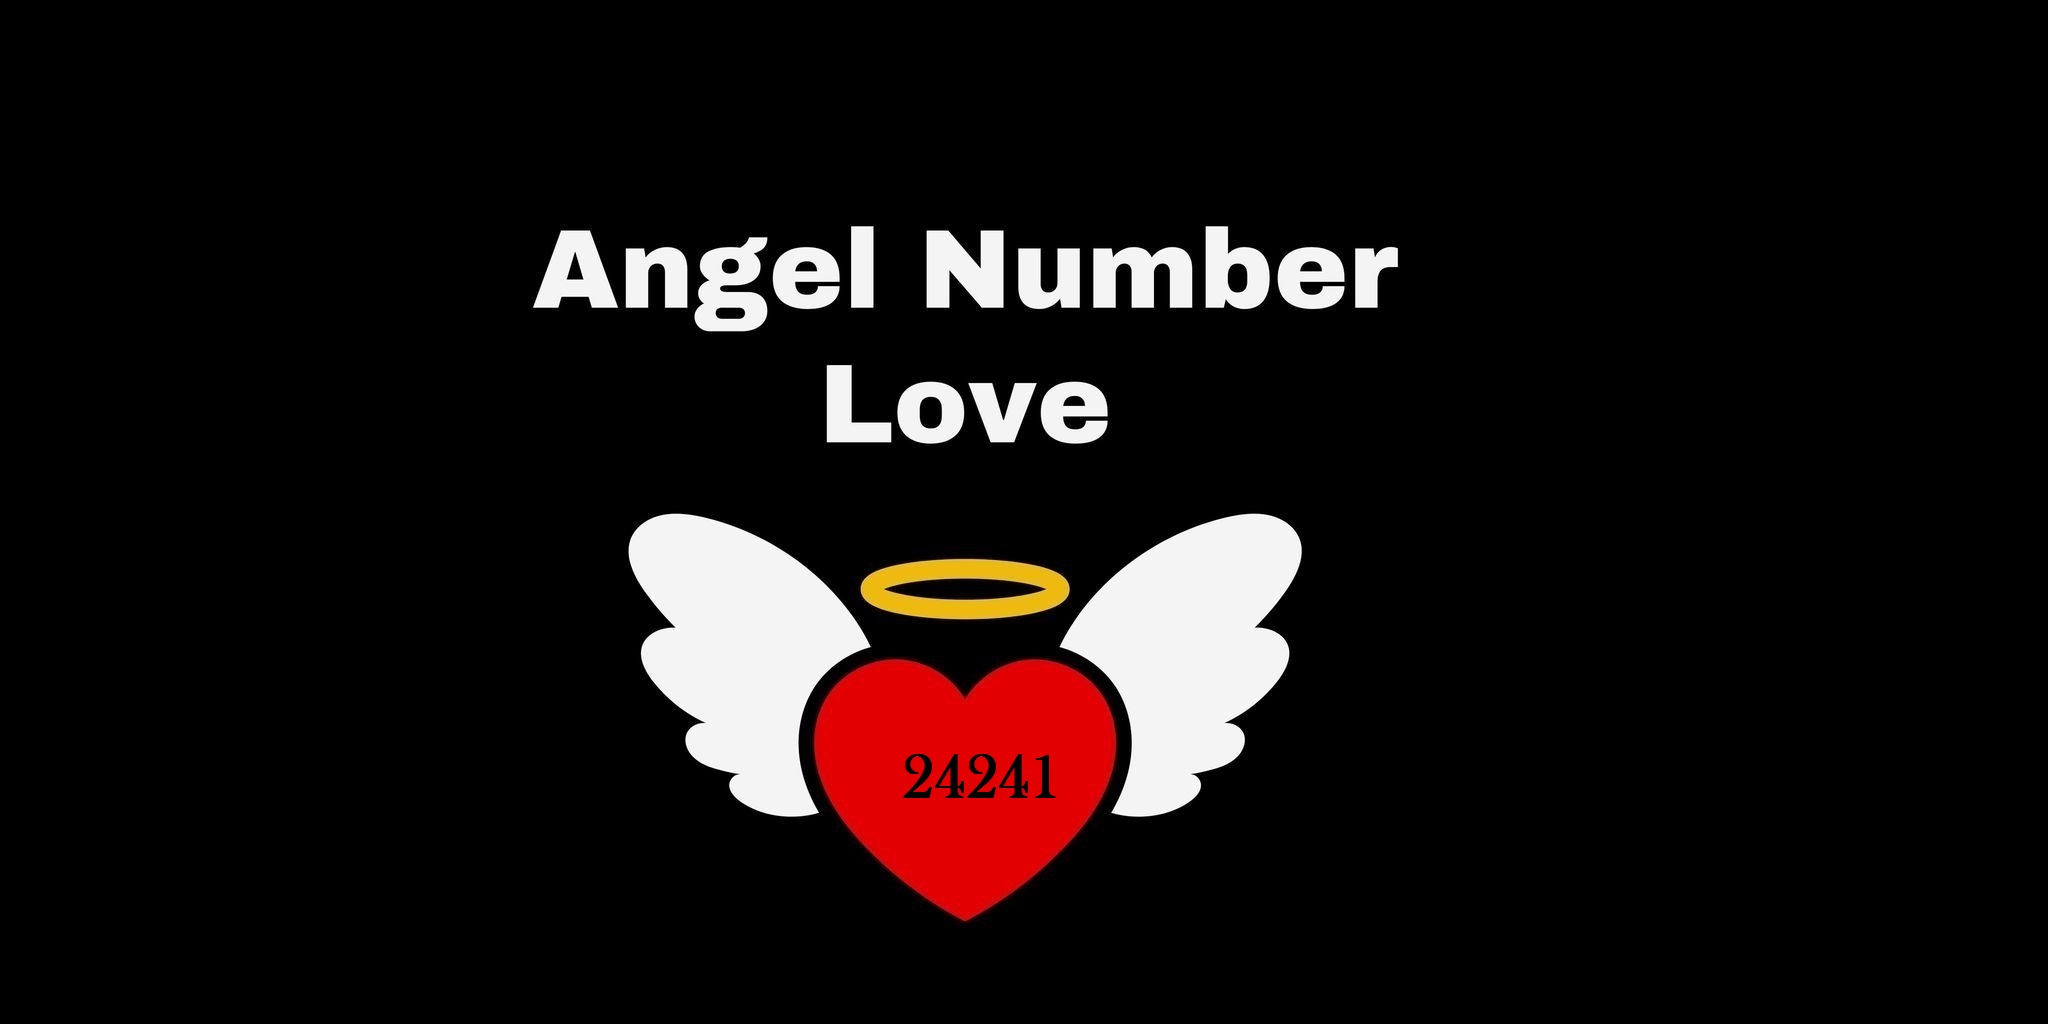 24241 Angel Number Meaning In Love